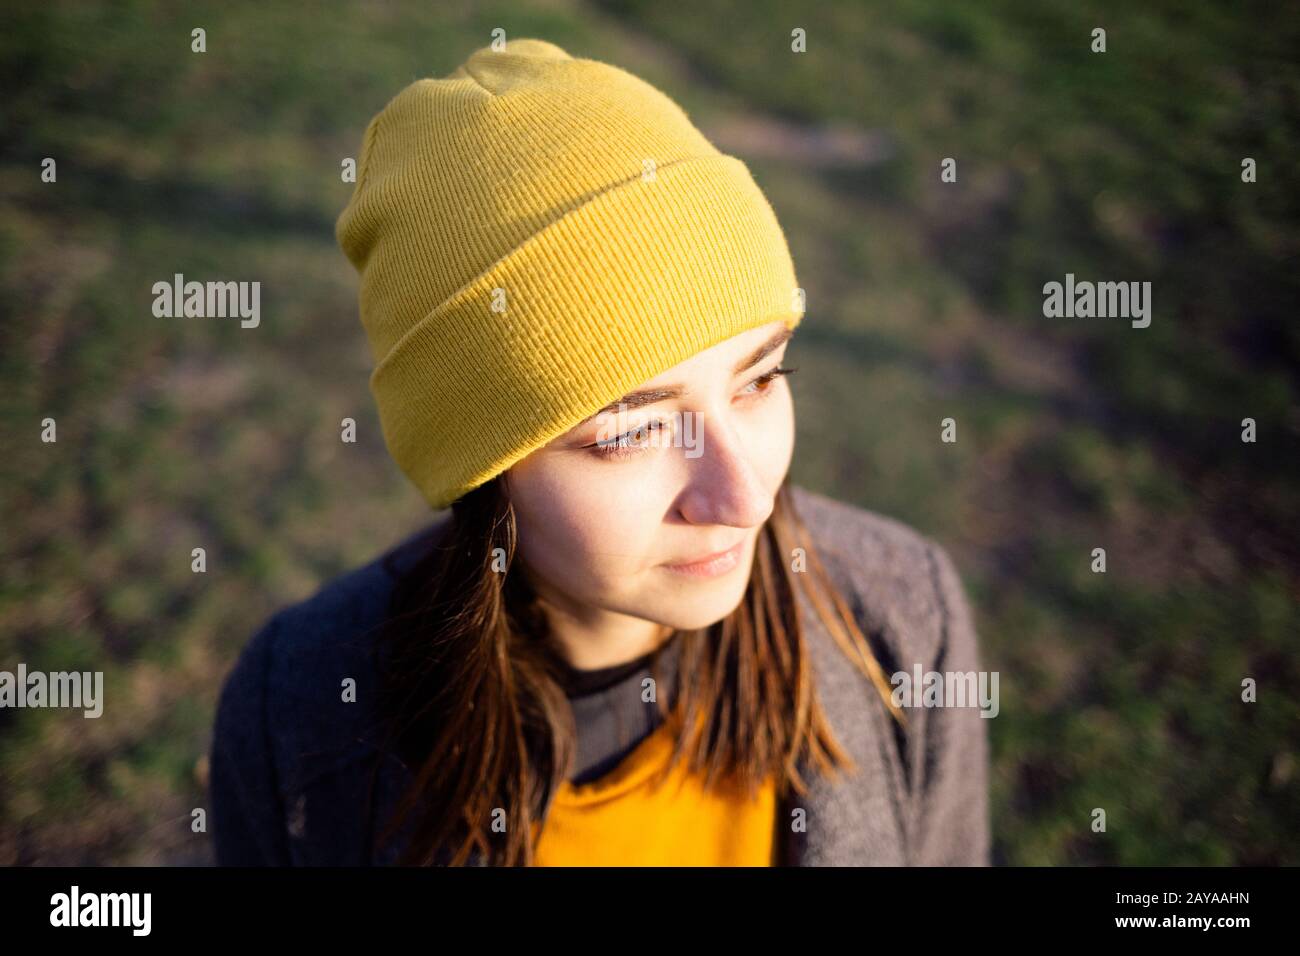 Portrait of a woman at sunset. Stock Photo